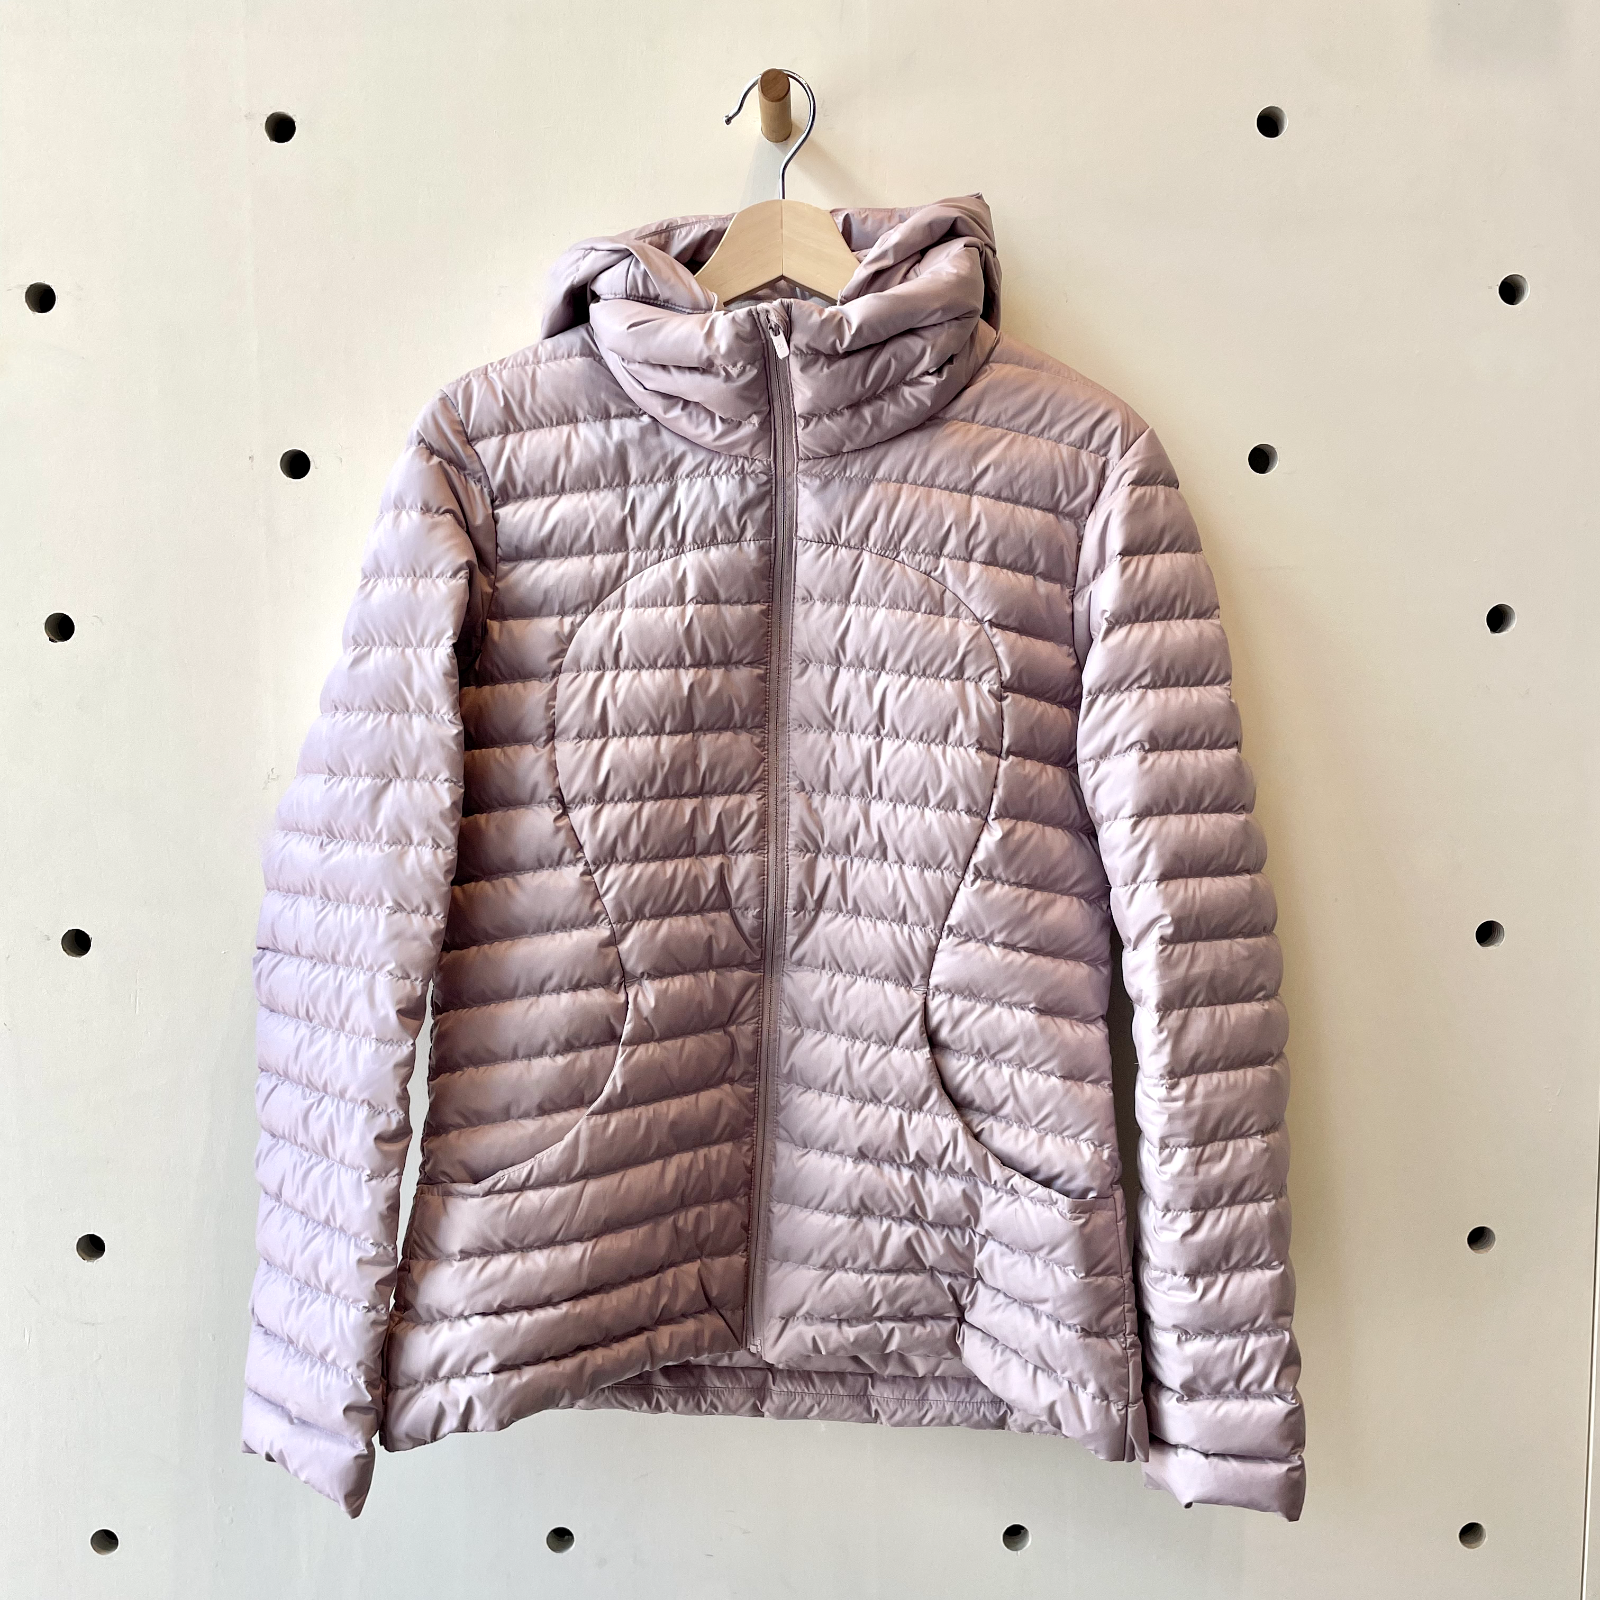 Primary image for 8 - Lululemon Smoky Blush Pink Pack It Down Puffer Jacket Coat 0517JB